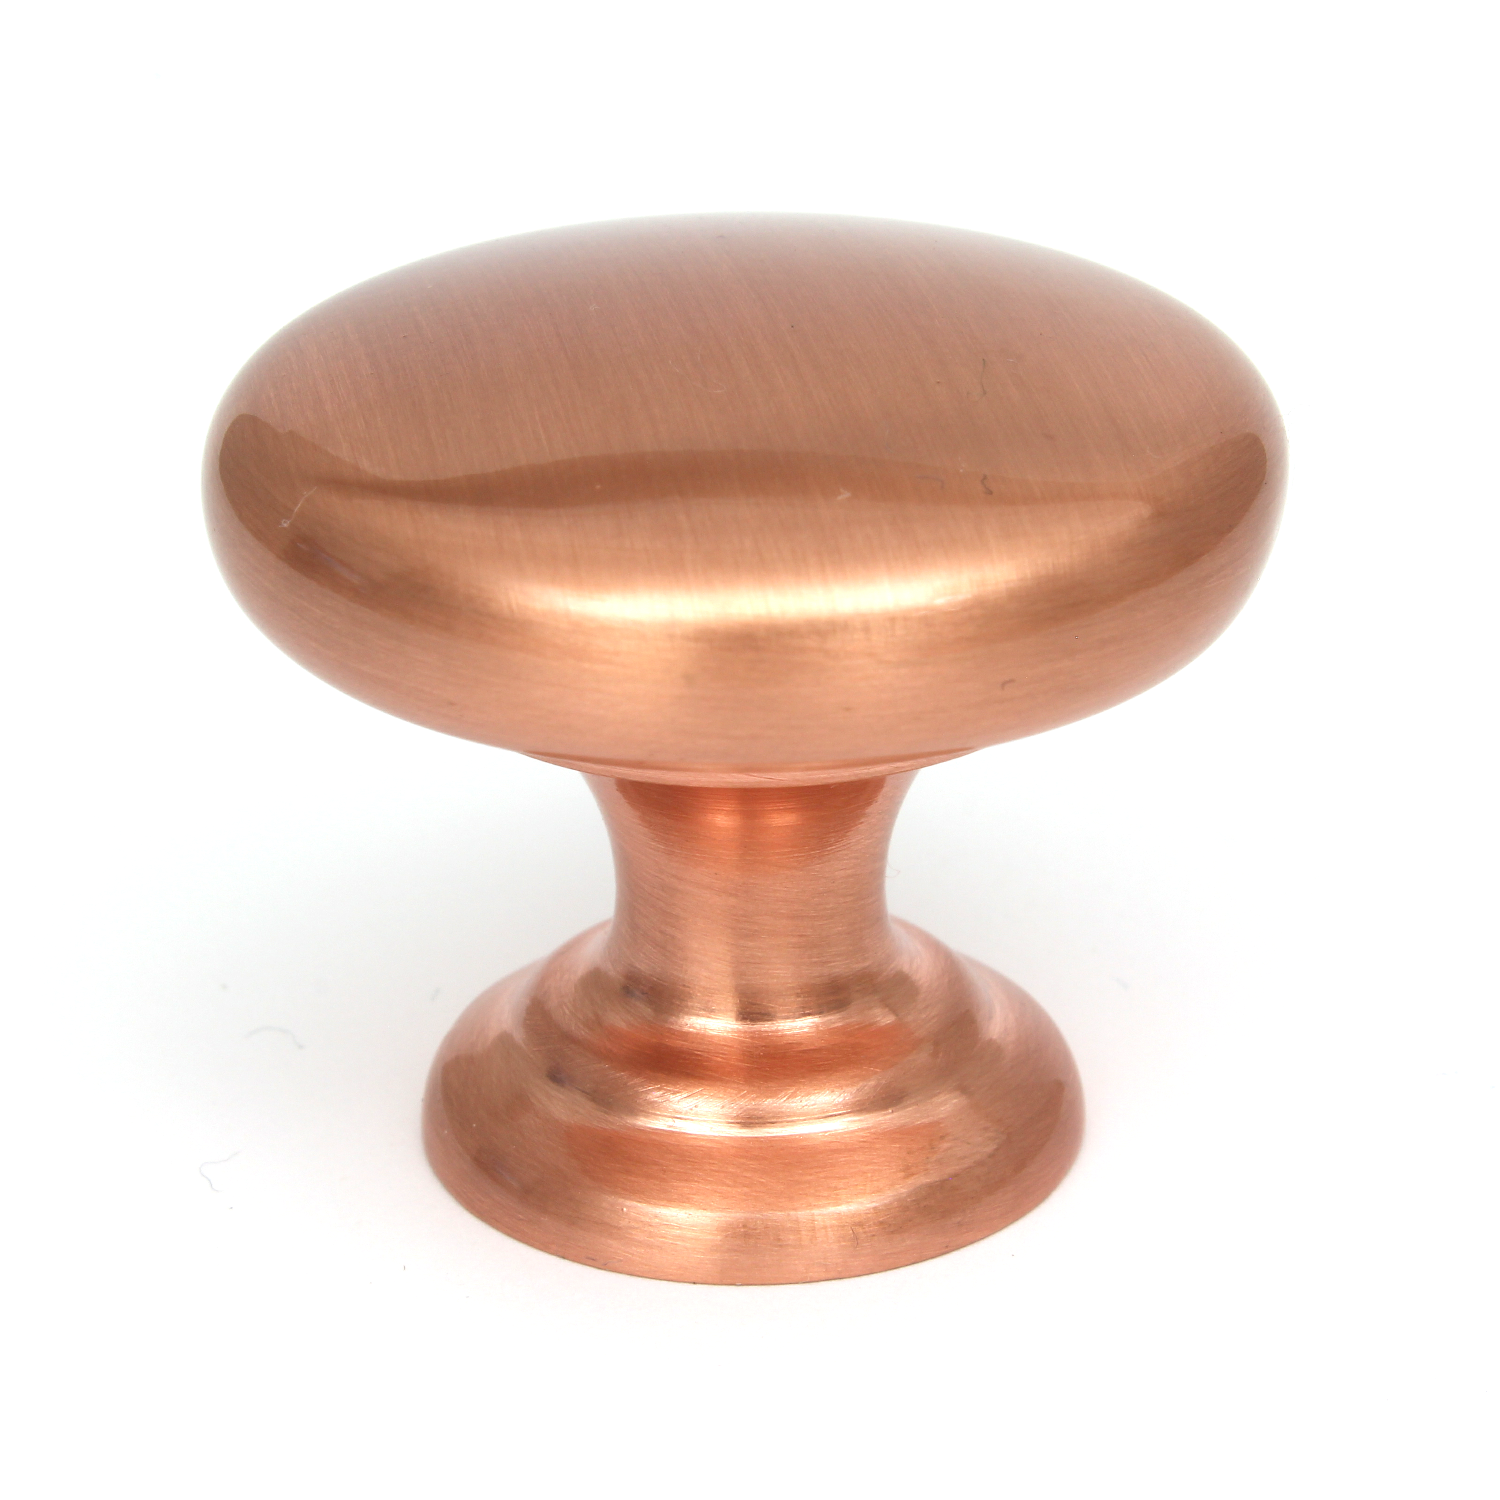 Crofts & Assinder Monmouth Cabinet Door Knobs, Brushed Satin Brass